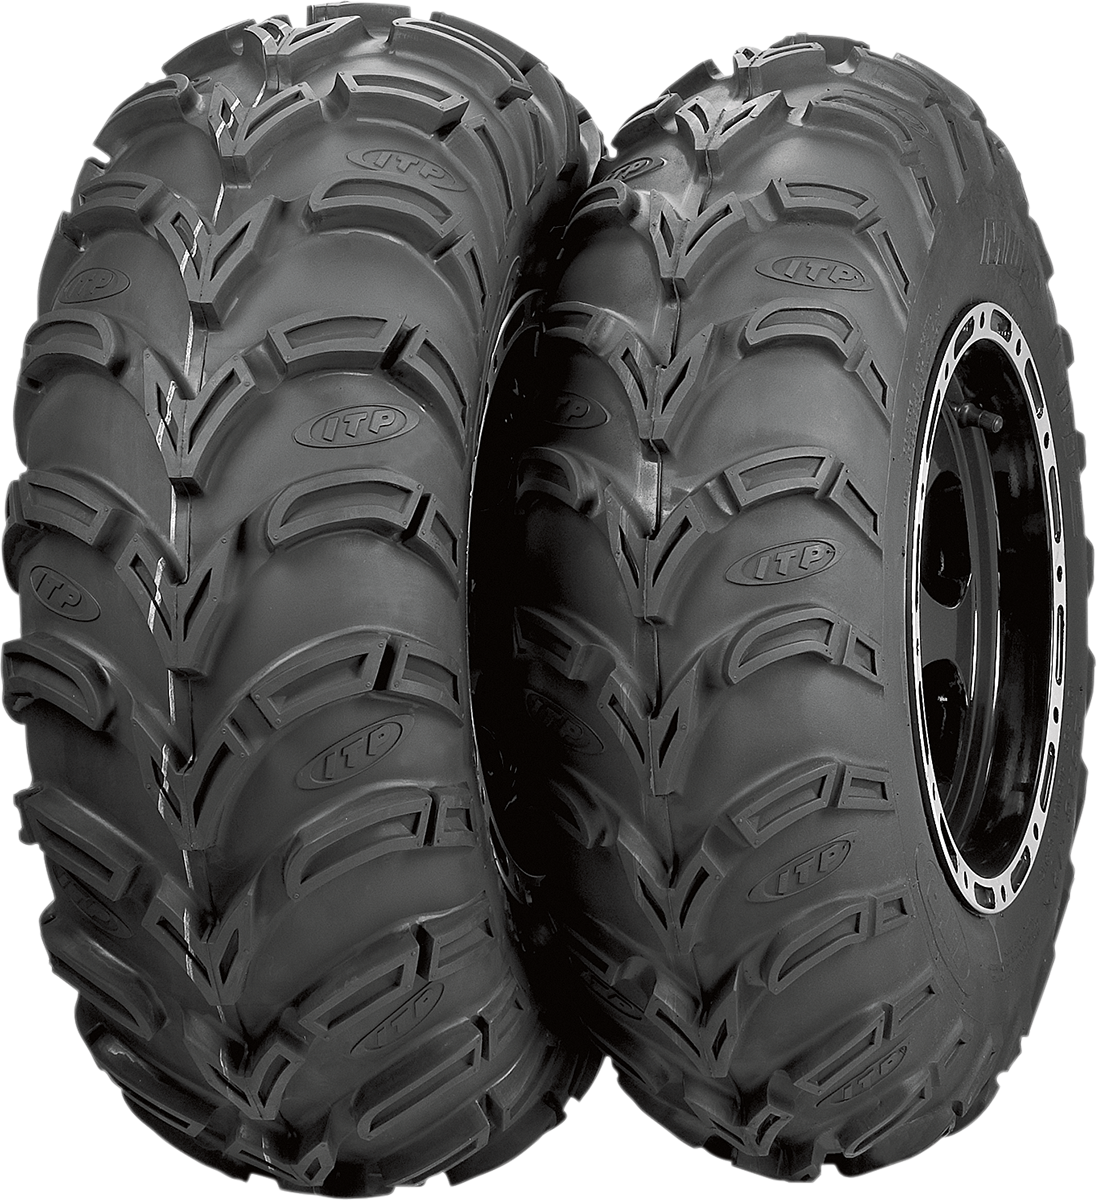 ITP Tire - Mud Lite XL - Front/Rear - 25x10-12 - 6 Ply 560364